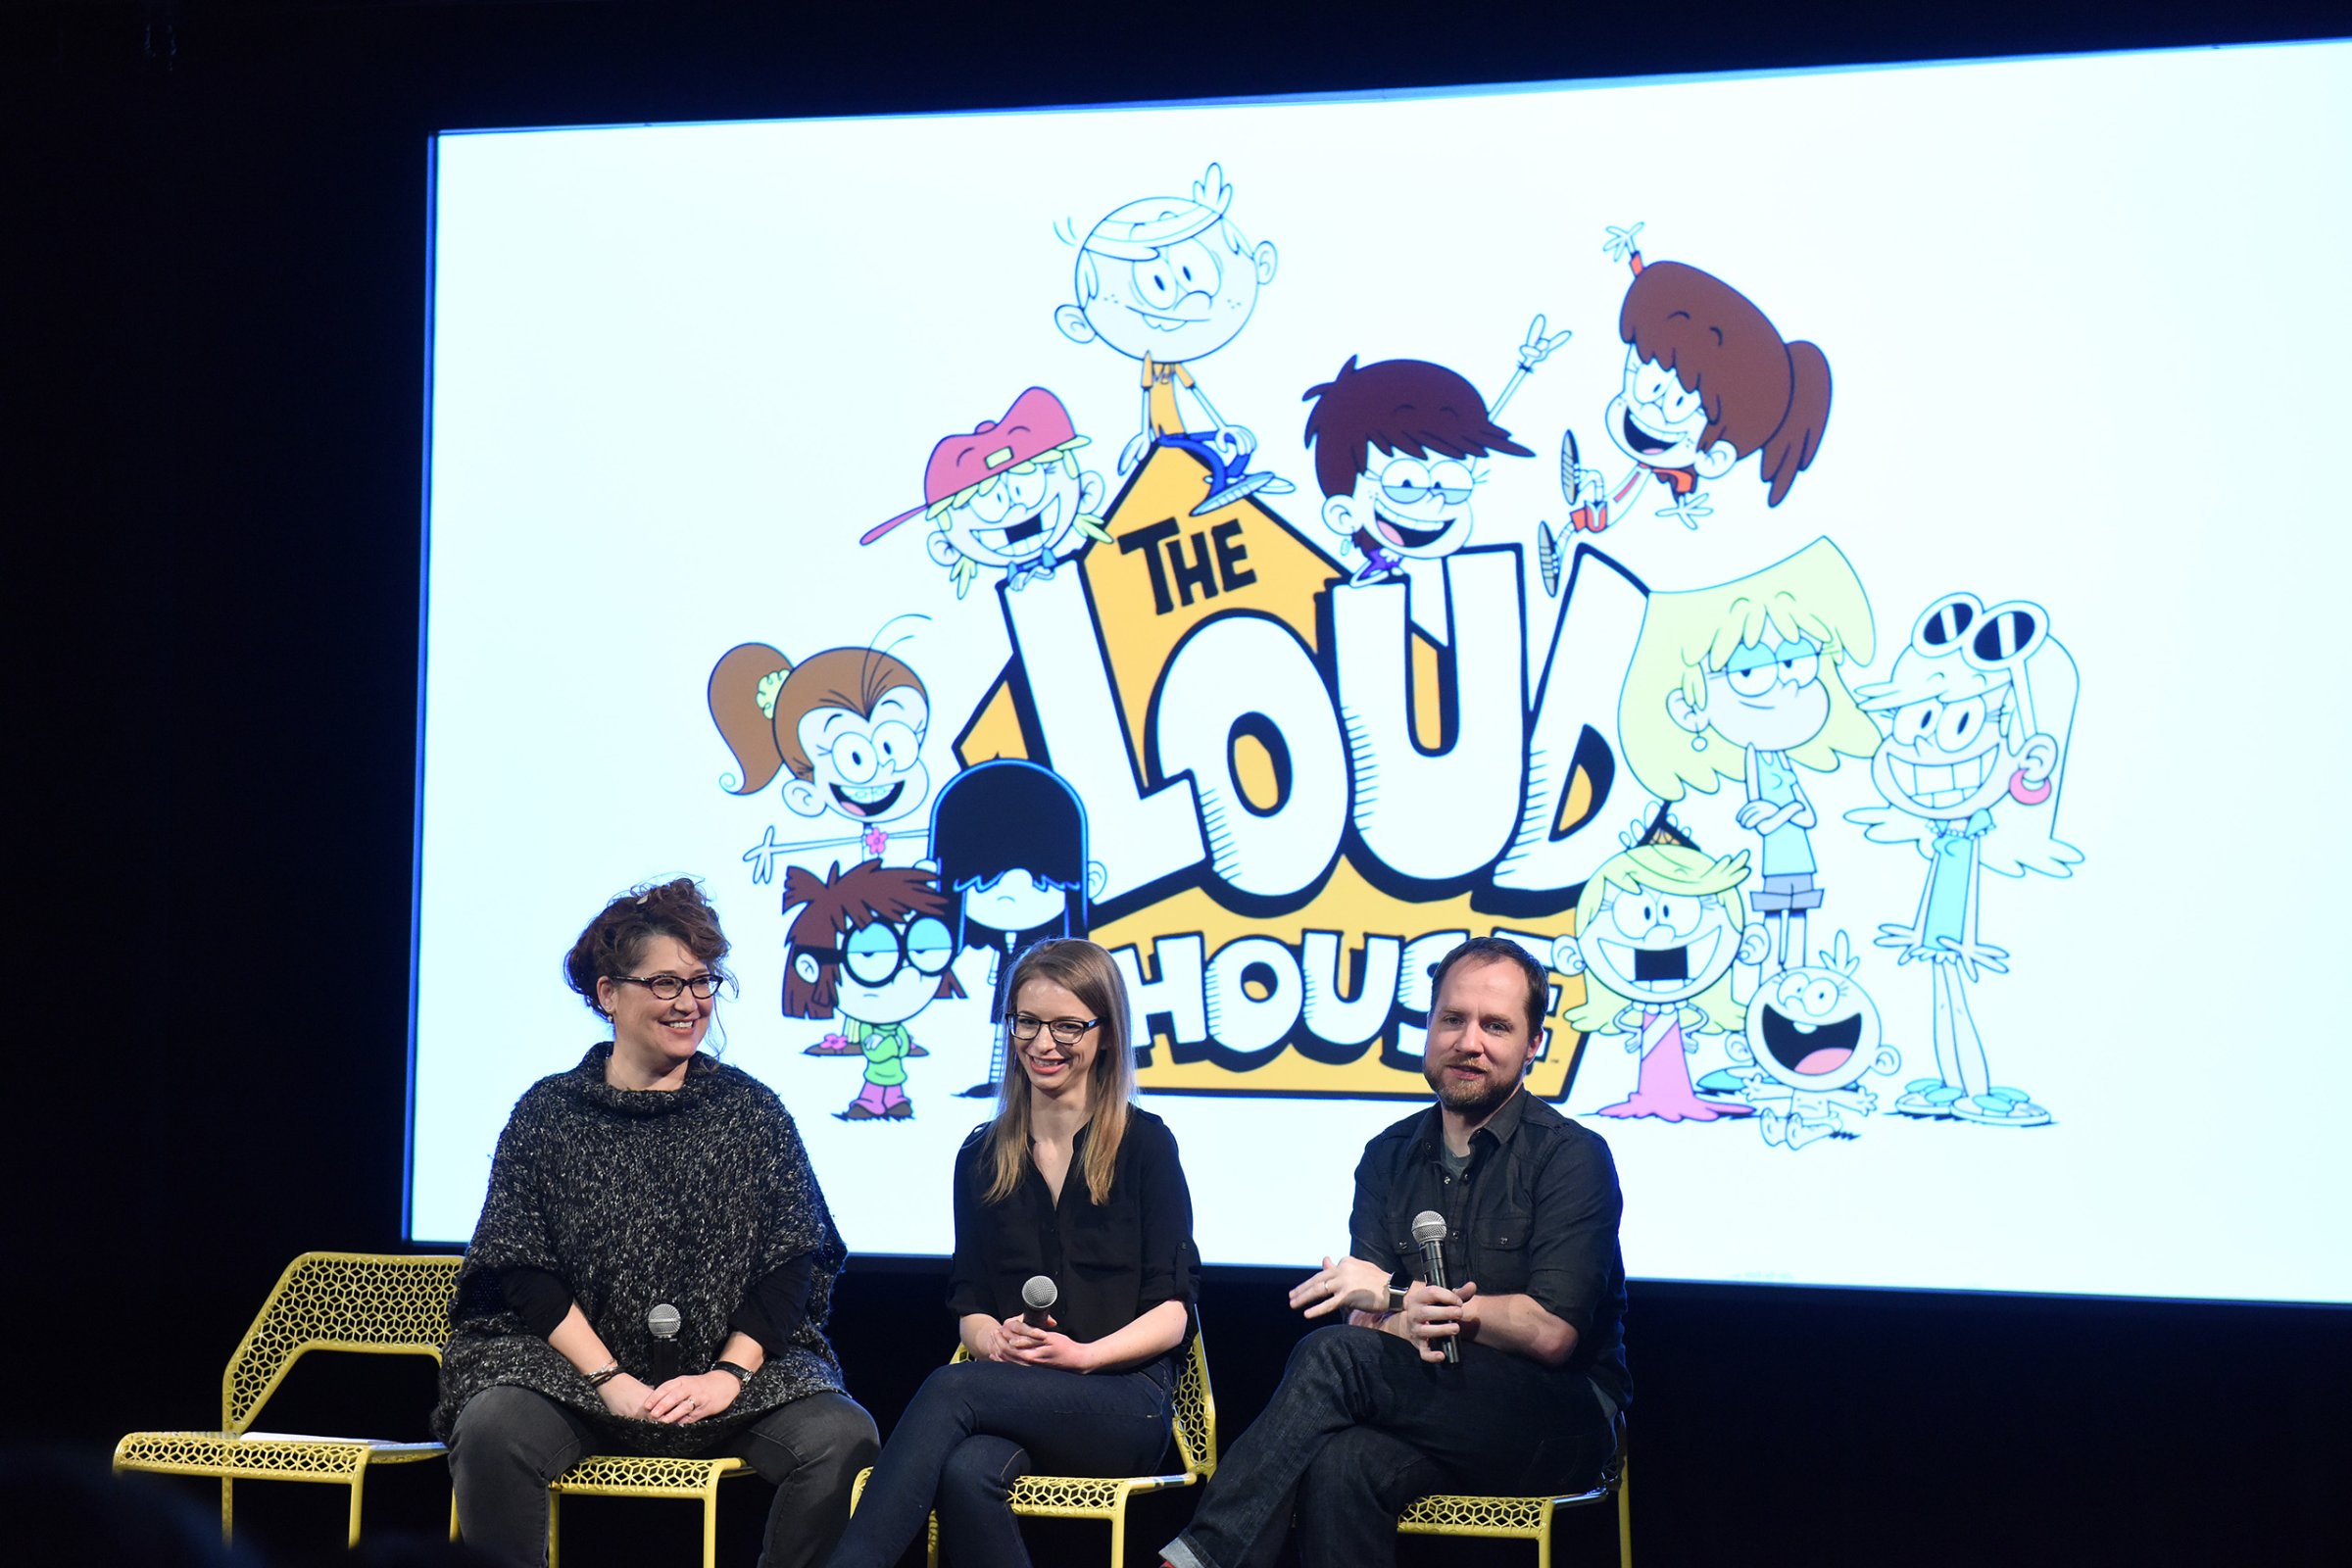 Producer Karen Malach, writer Karla Sakas Shropshire and executive producer Chris Savino speak during "The Loud House" event presented by Nickelodeon during Day Two of aTVfest 2016 presented by SCAD in Atlanta, Georgia, on Feb. 5, 2016.